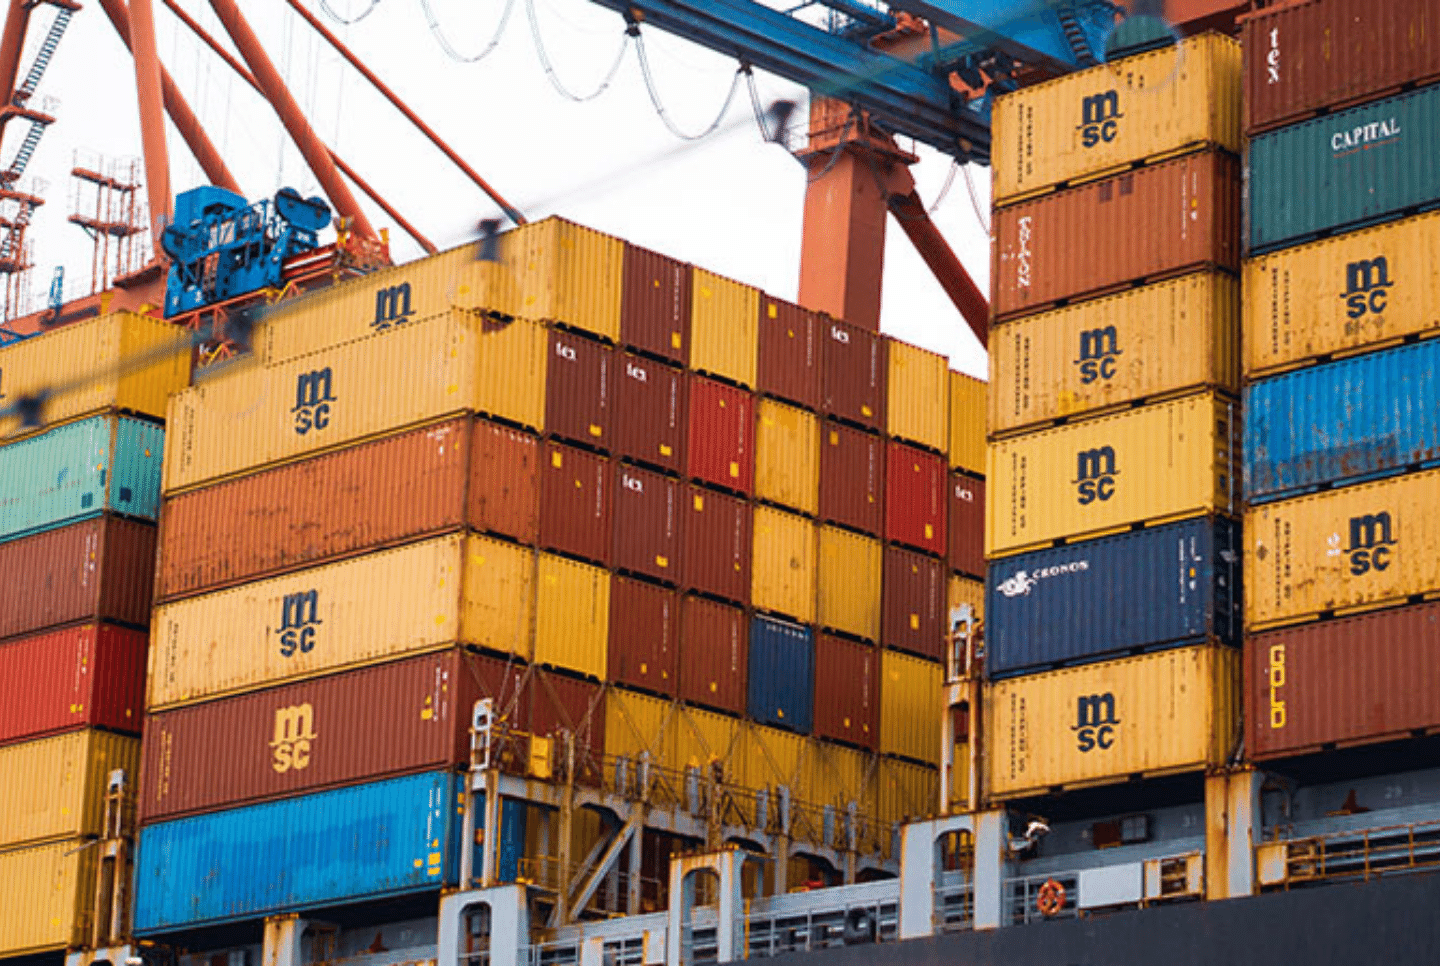 Cargo containers in a shipyard, Freight Forwarders, Shippers: Creating Long-Term Relationships